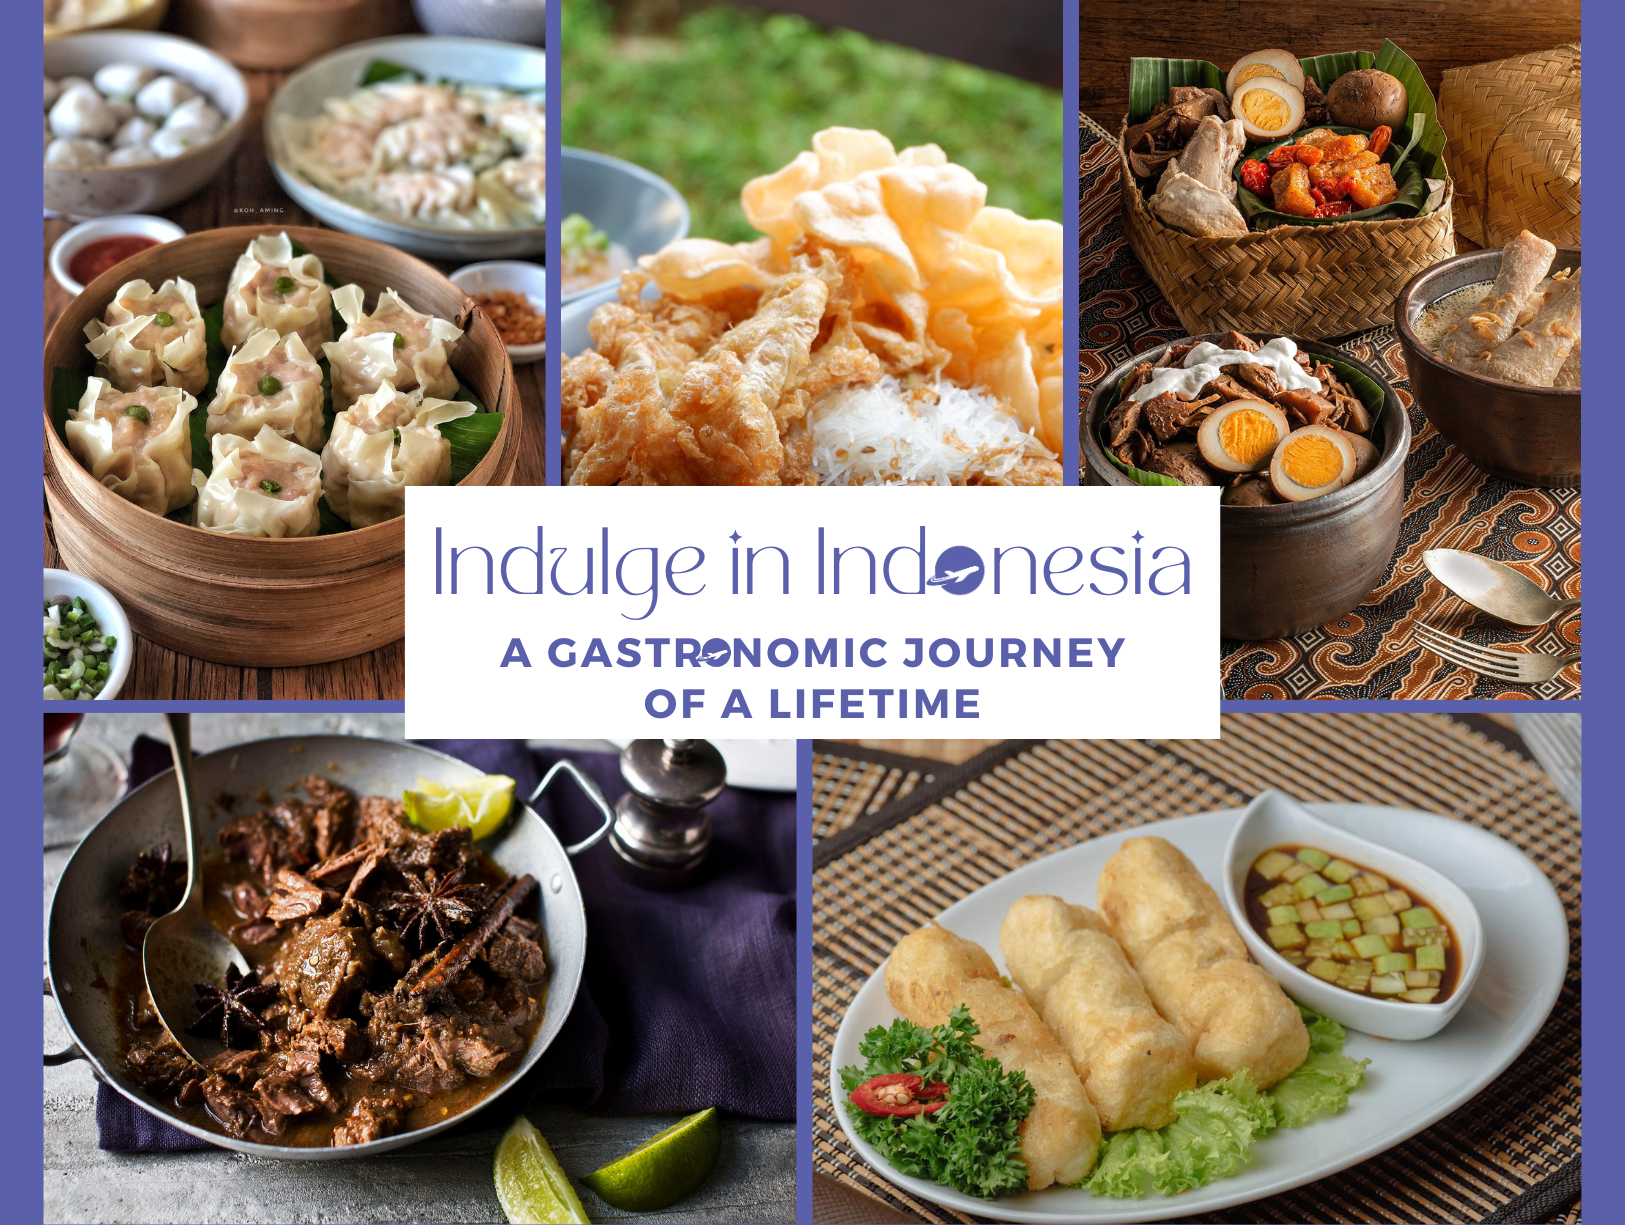 Indulge in Indonesia: A Gastronomic Journey of a Lifetime